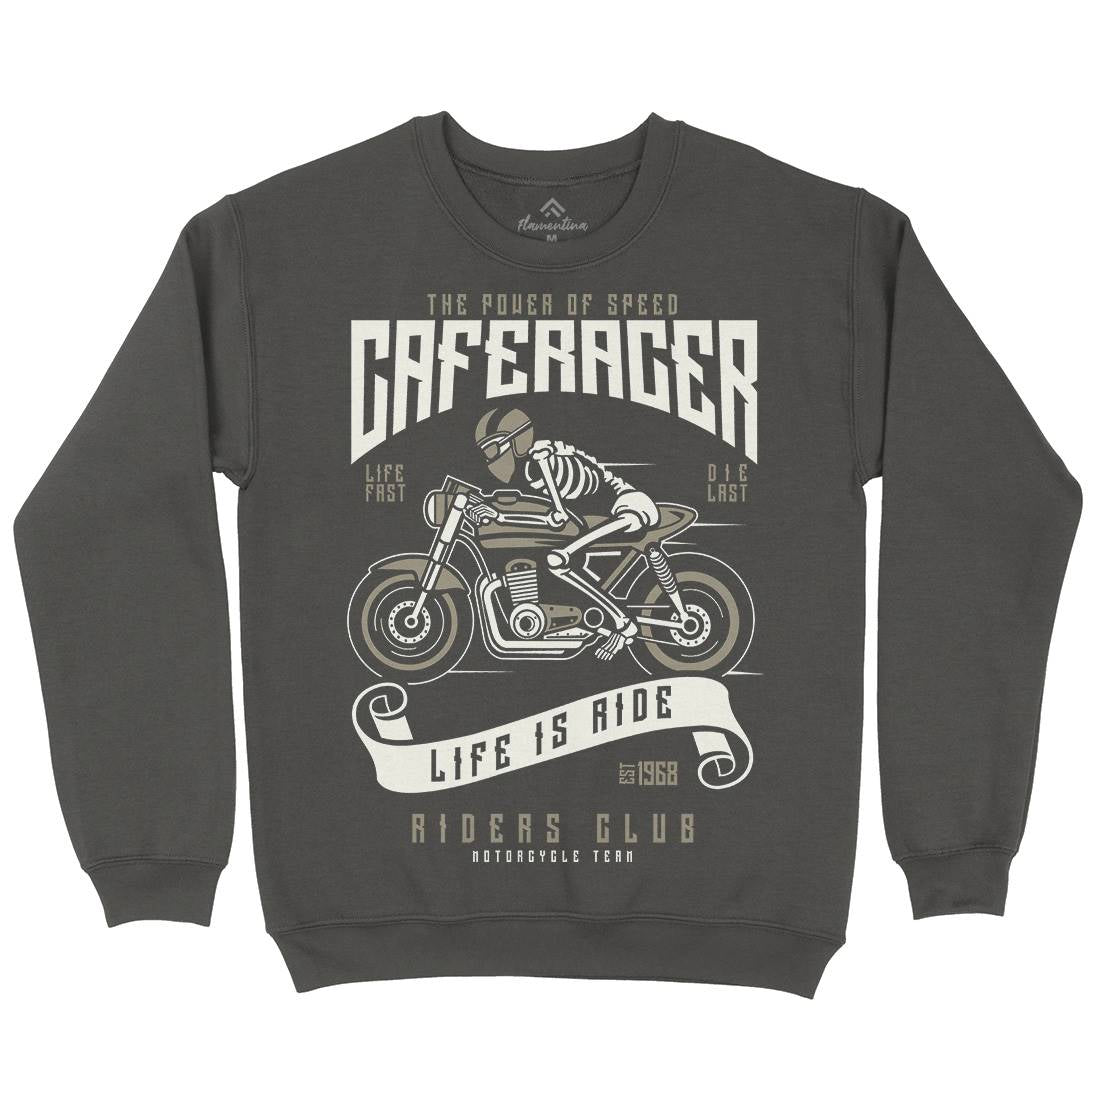 Speed Of Caferacer Kids Crew Neck Sweatshirt Motorcycles A154